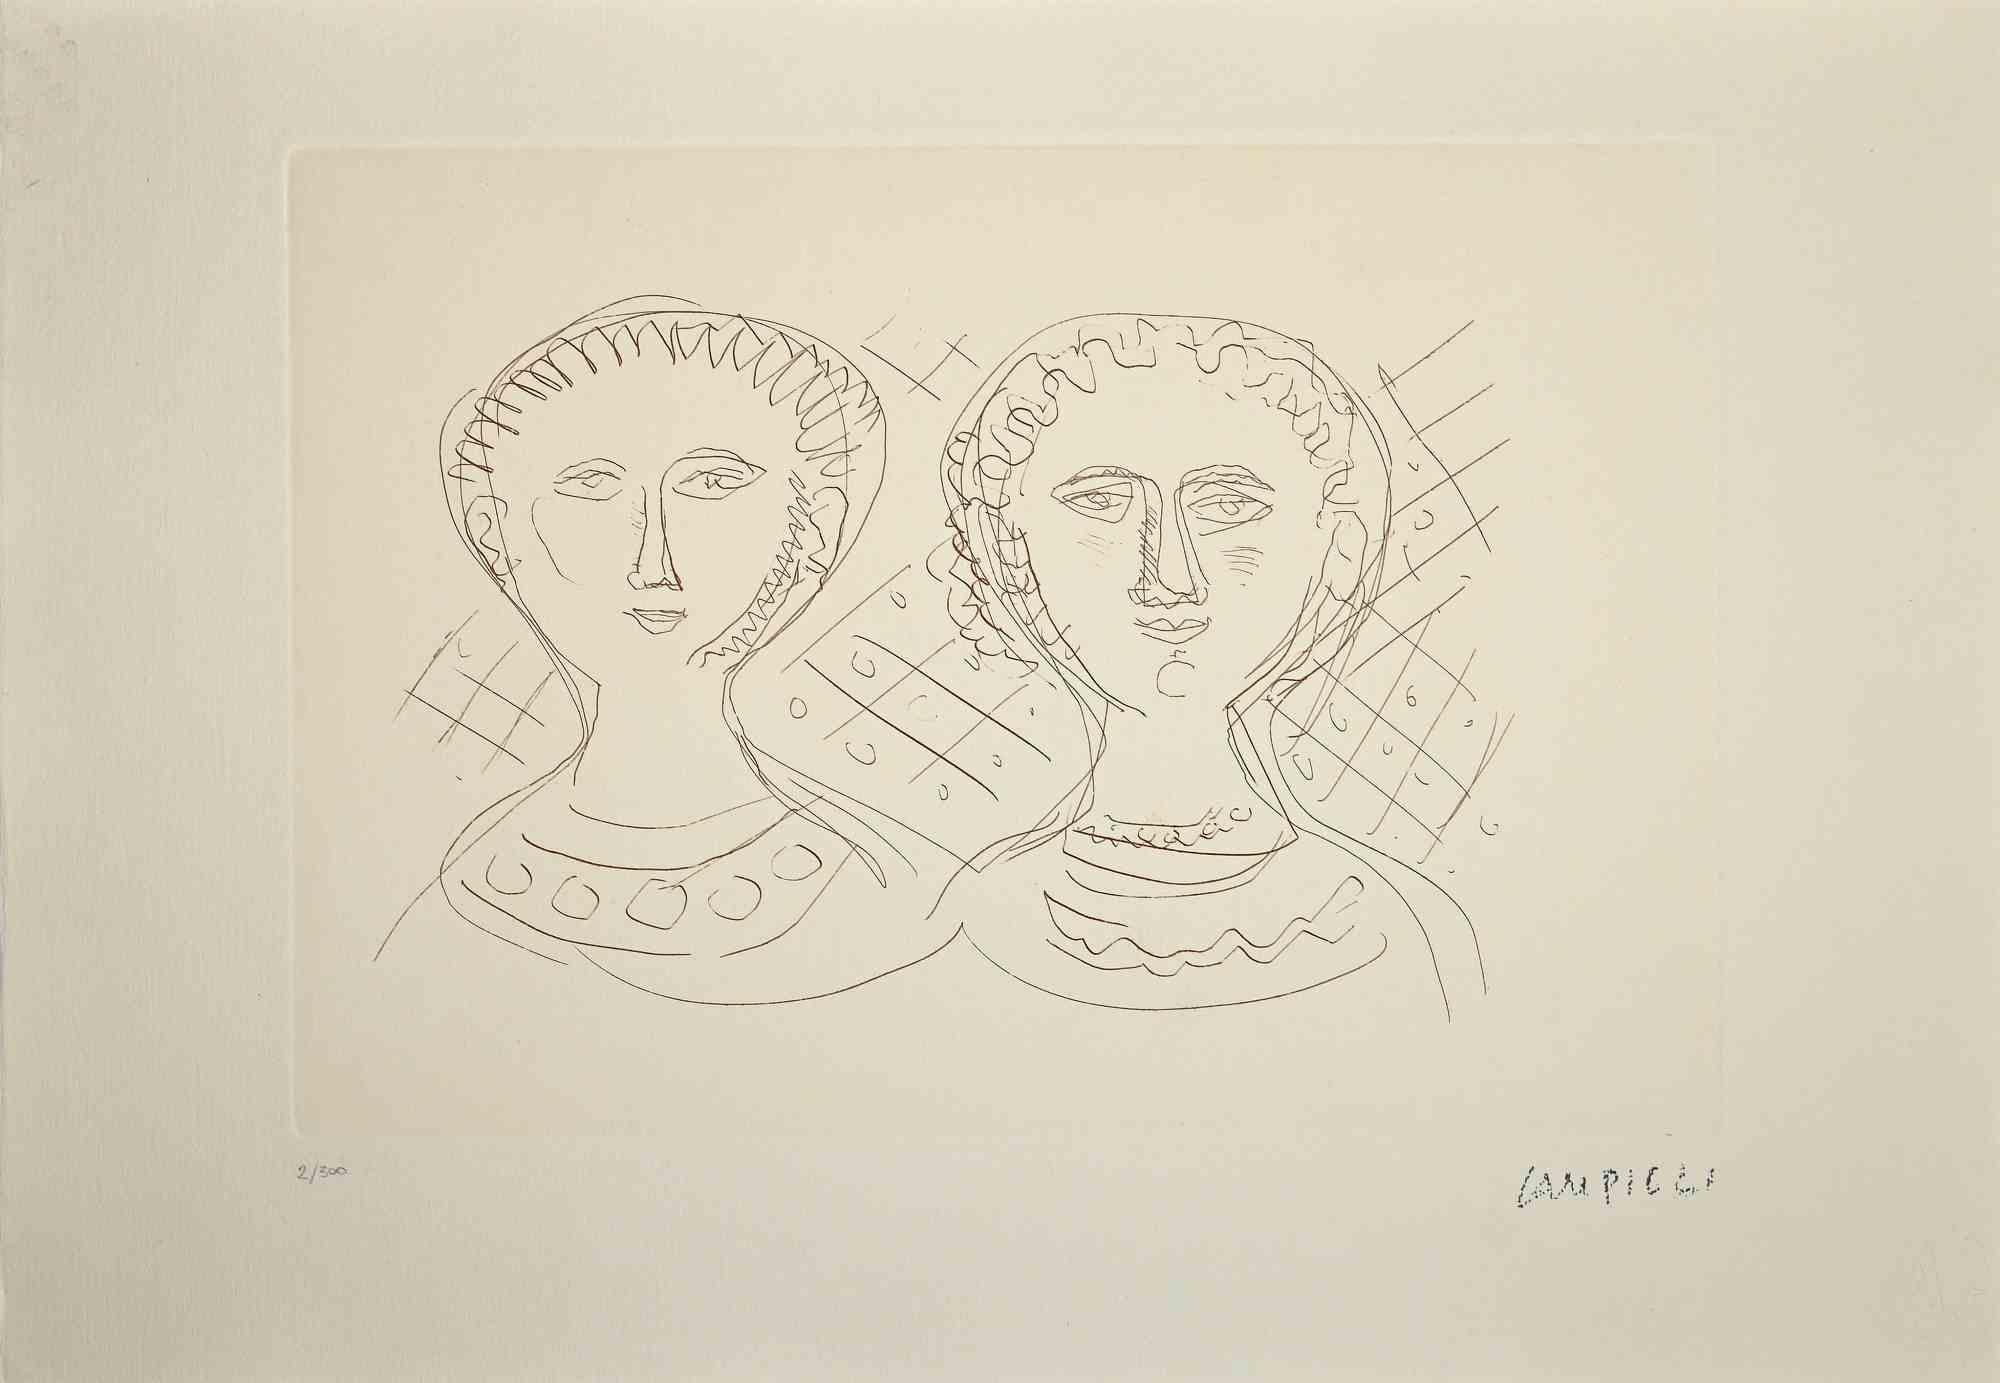 The two women is an original print realized by Massimo Campigli in the 1970/1971s.

Etching on paper.

This artwork it is part of a series of works created in the last period of the artist and printed at the turn of the year of his death, which took